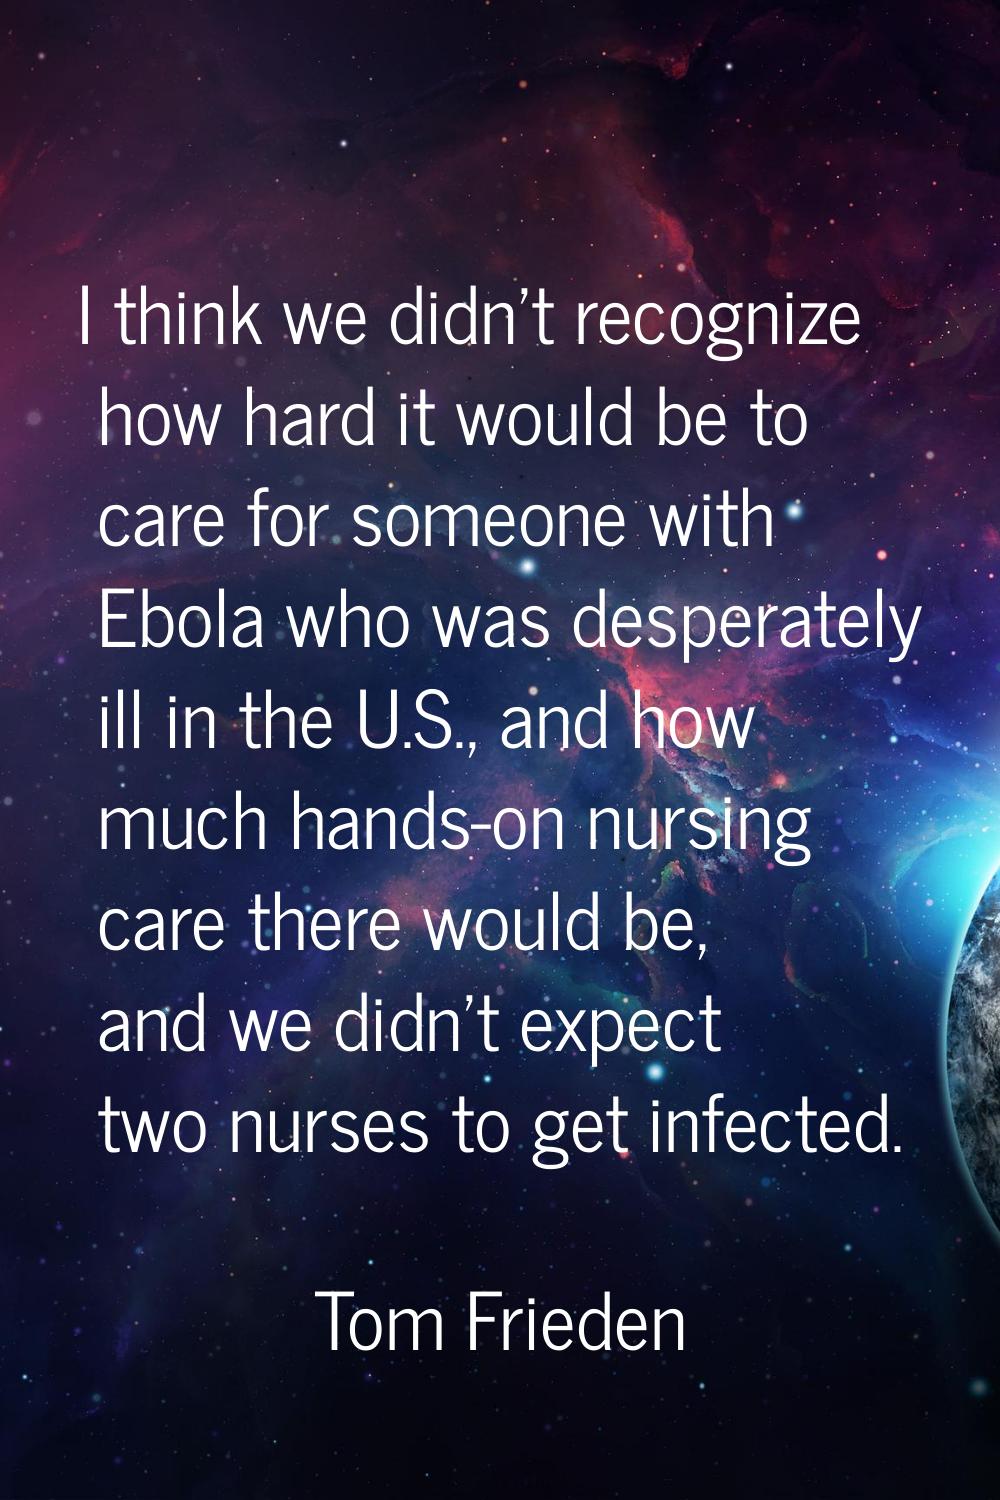 I think we didn't recognize how hard it would be to care for someone with Ebola who was desperately